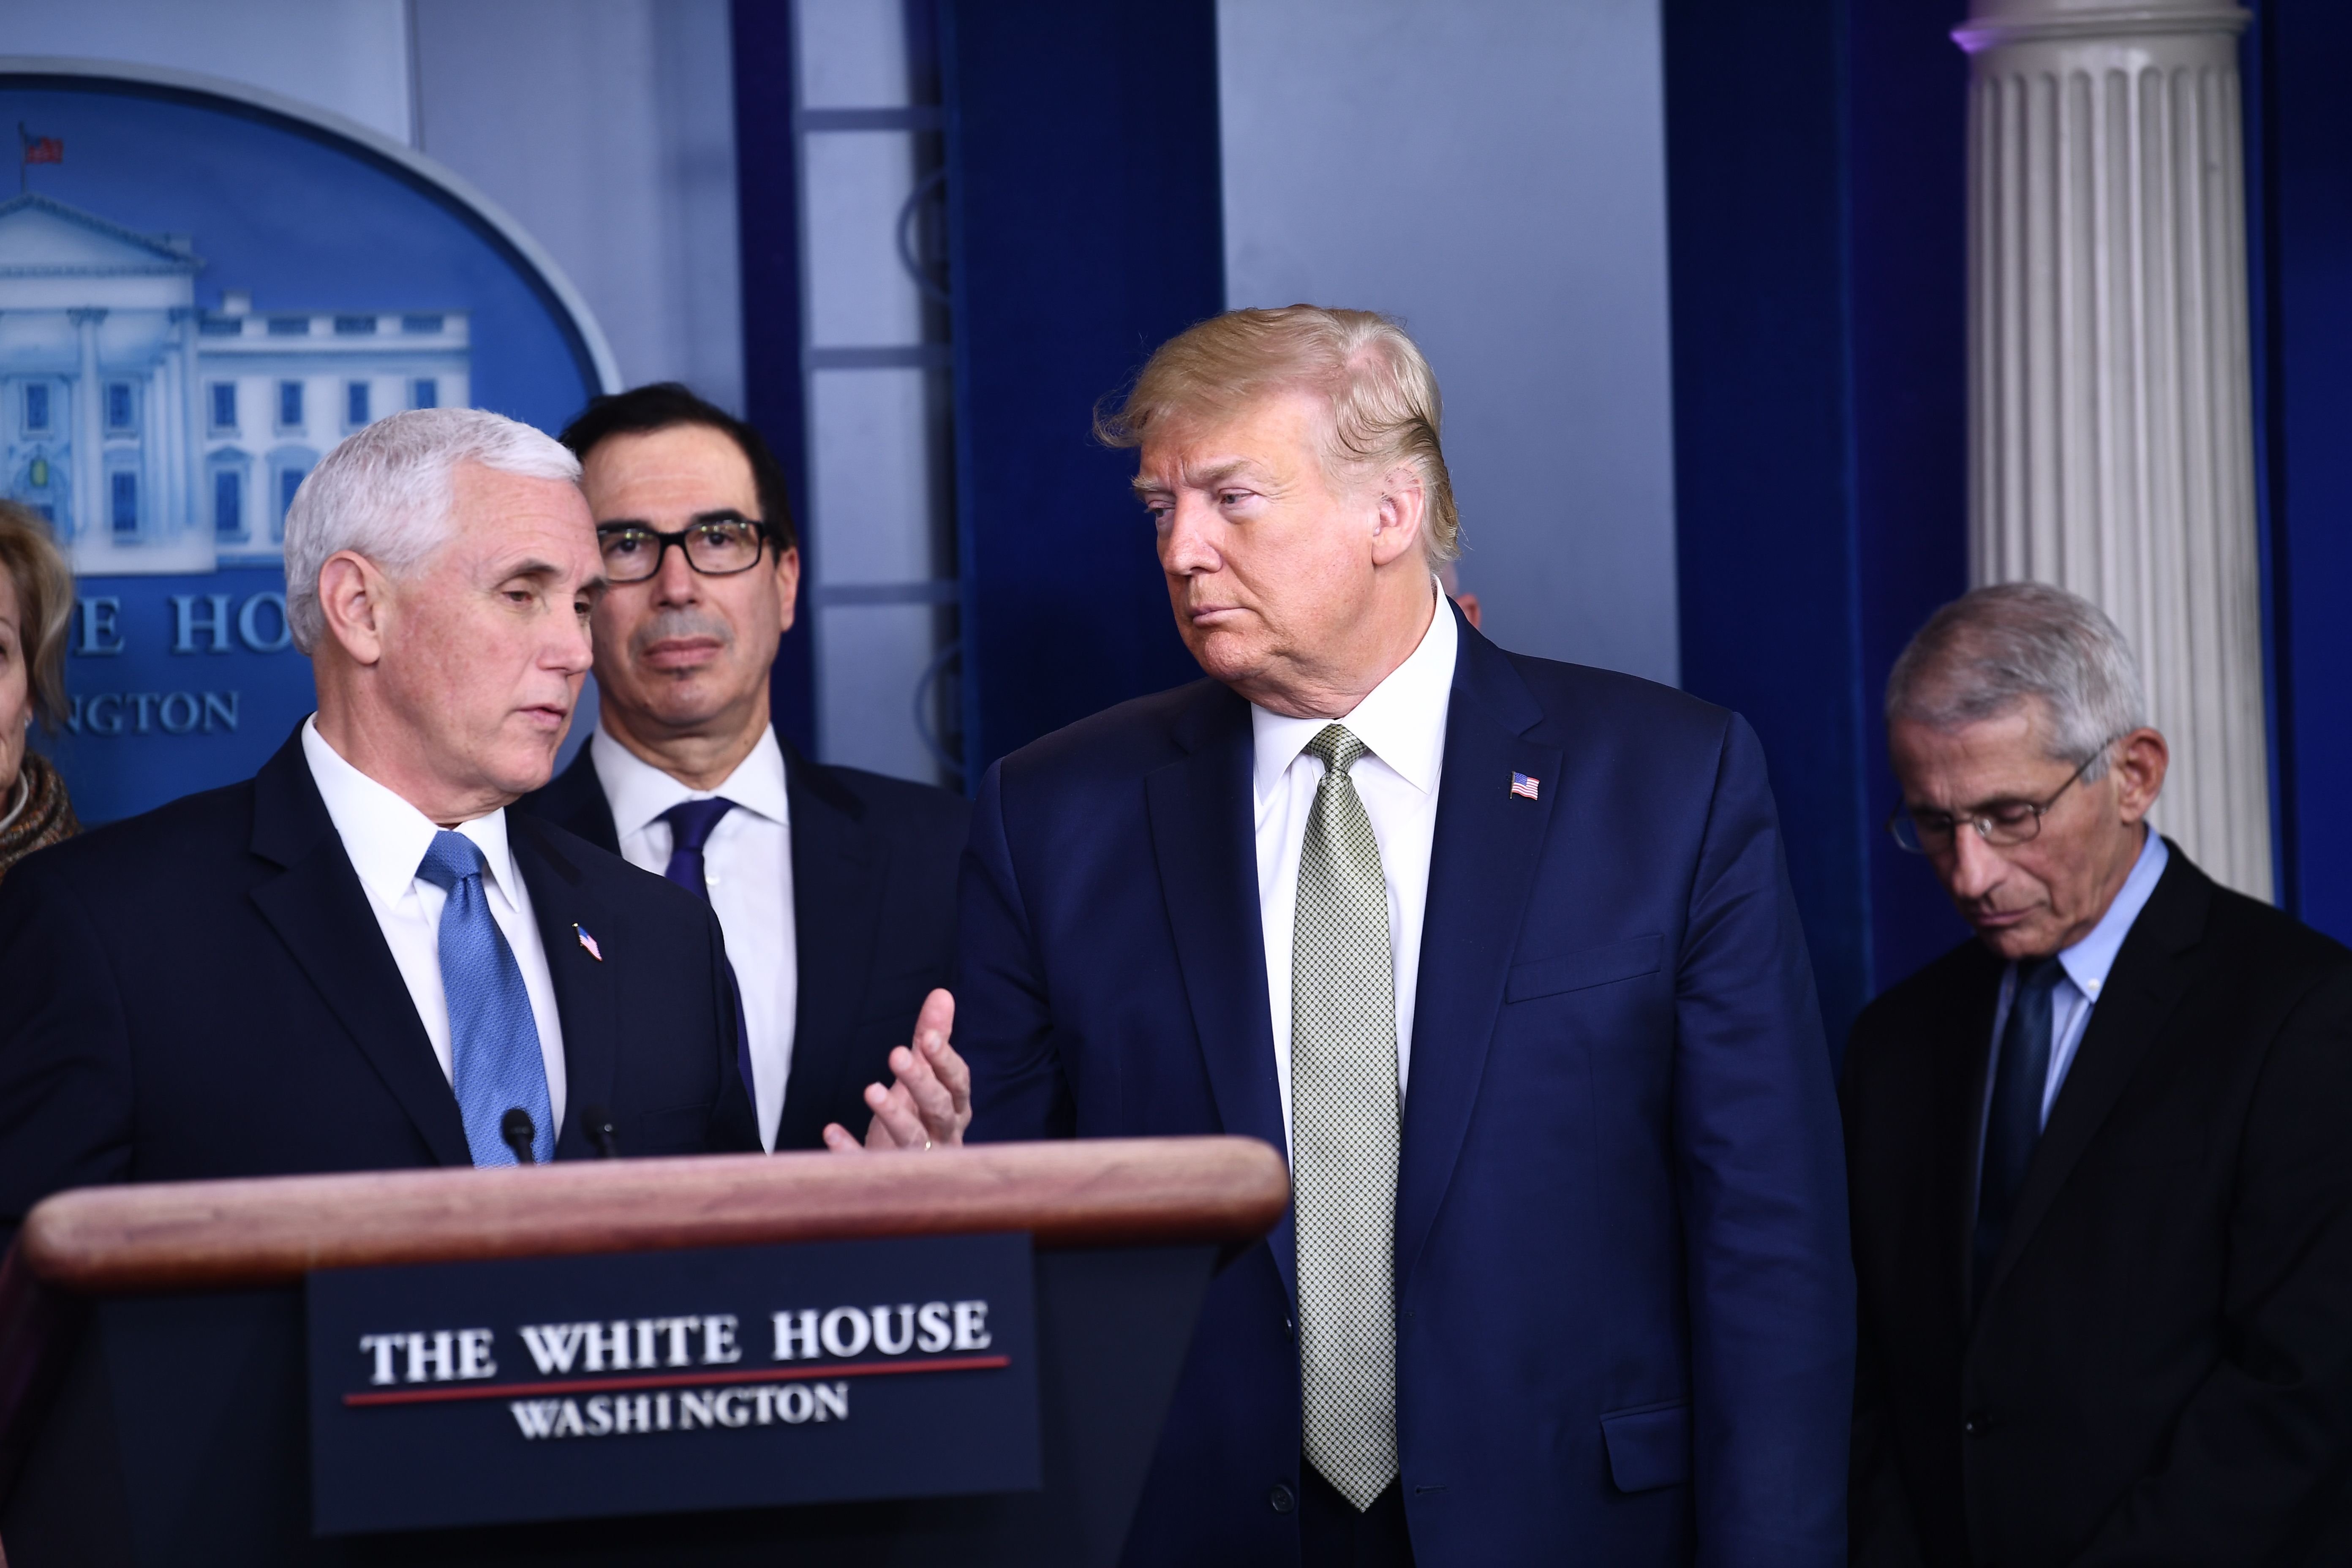 US President Donald Trump(R) listens to Vice President Mike Pence as they attend the daily press briefing on the Coronavirus pandemic situation at the White House on March 17, 2020 in Washington, DC. - The coronavirus outbreak has transformed the US virtually overnight from a place of boundless consumerism to one suddenly constrained by nesting and social distancing.The crisis tests all retailers, leading to temporary store closures at companies like Apple and Nike, manic buying of food staples at supermarkets and big-box stores like Walmart even as many stores remain open for business -- albeit in a weirdly anemic consumer environment (Photo by BRENDAN SMIALOWSKI/AFP via Getty Images)